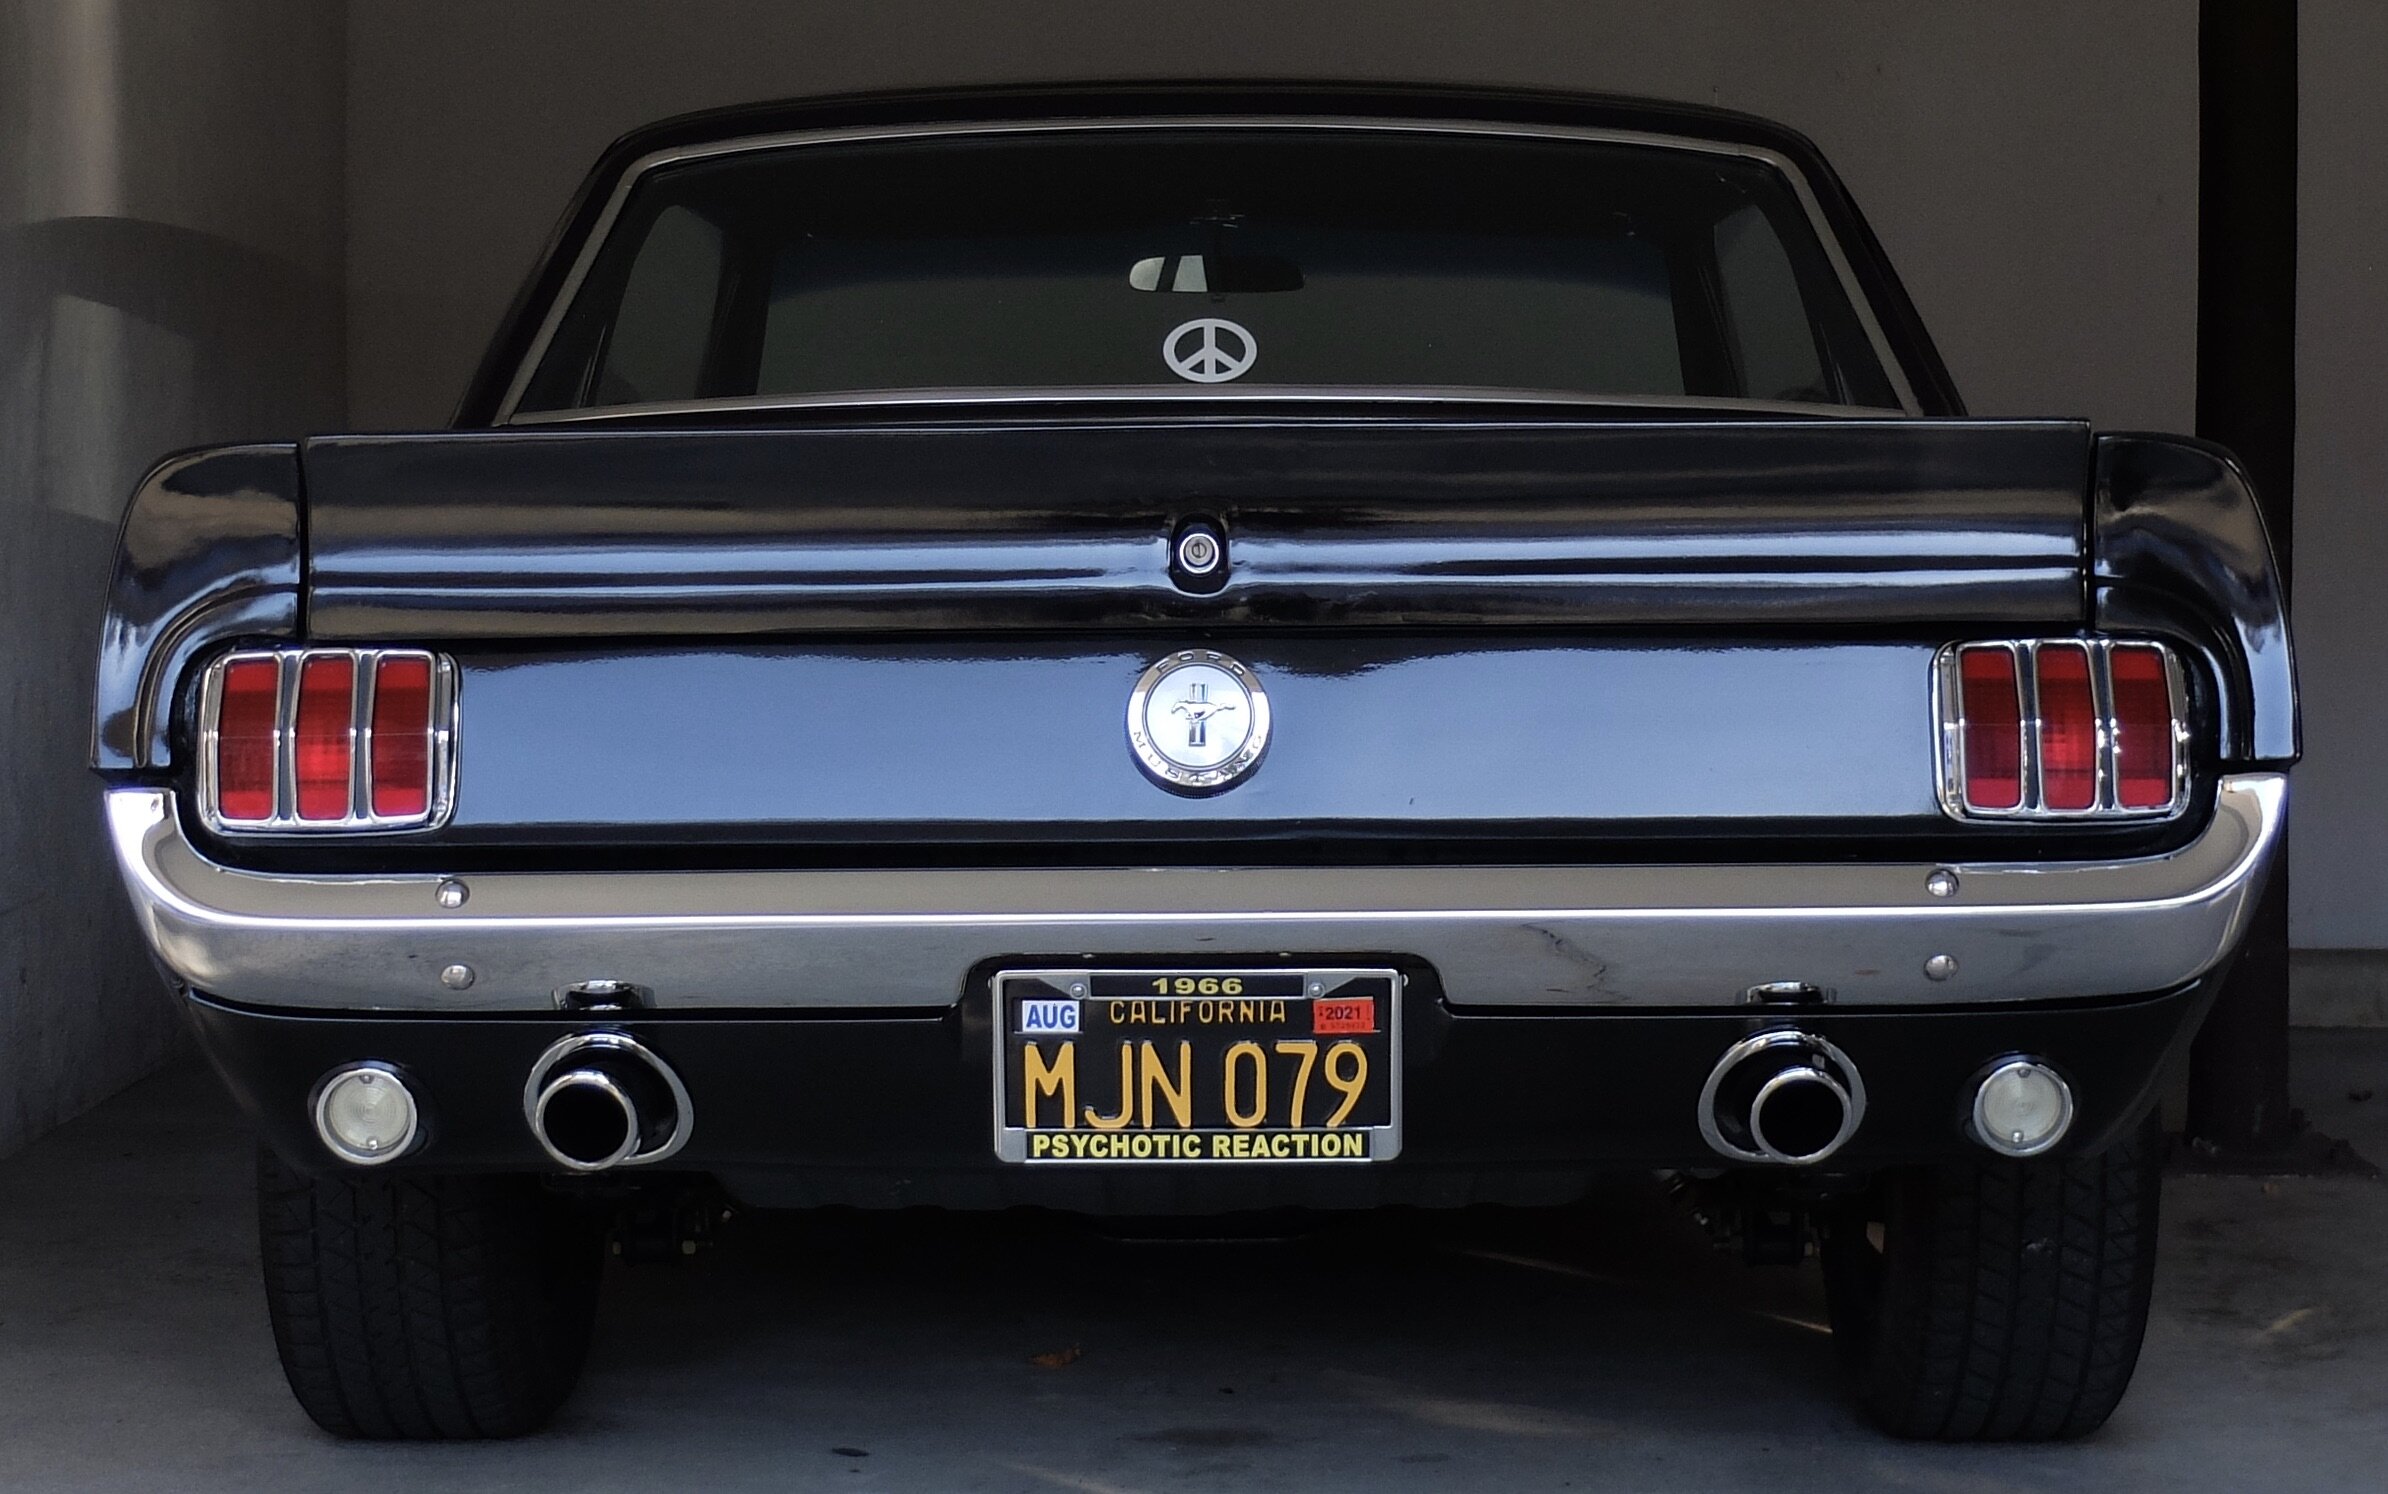 In the license plate frame, the year could be 2020 vs. 1966.